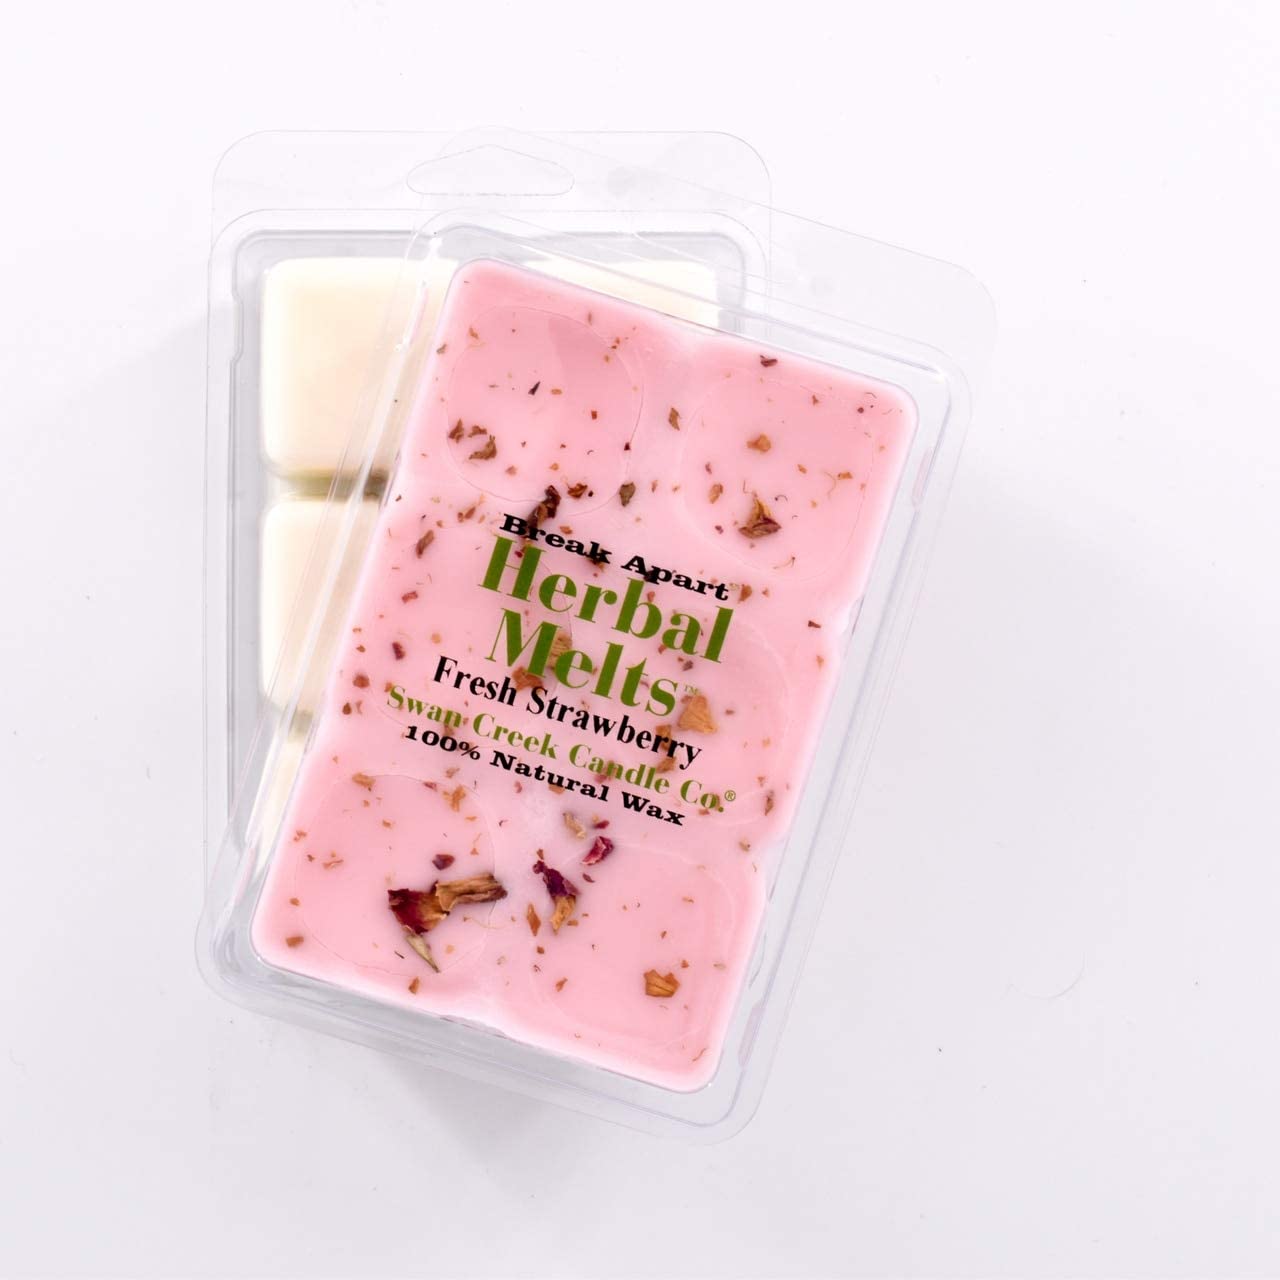 pink wax with bits of dried strawberries on top in packaging with another package showing the bottom of the wax melts break apart design.